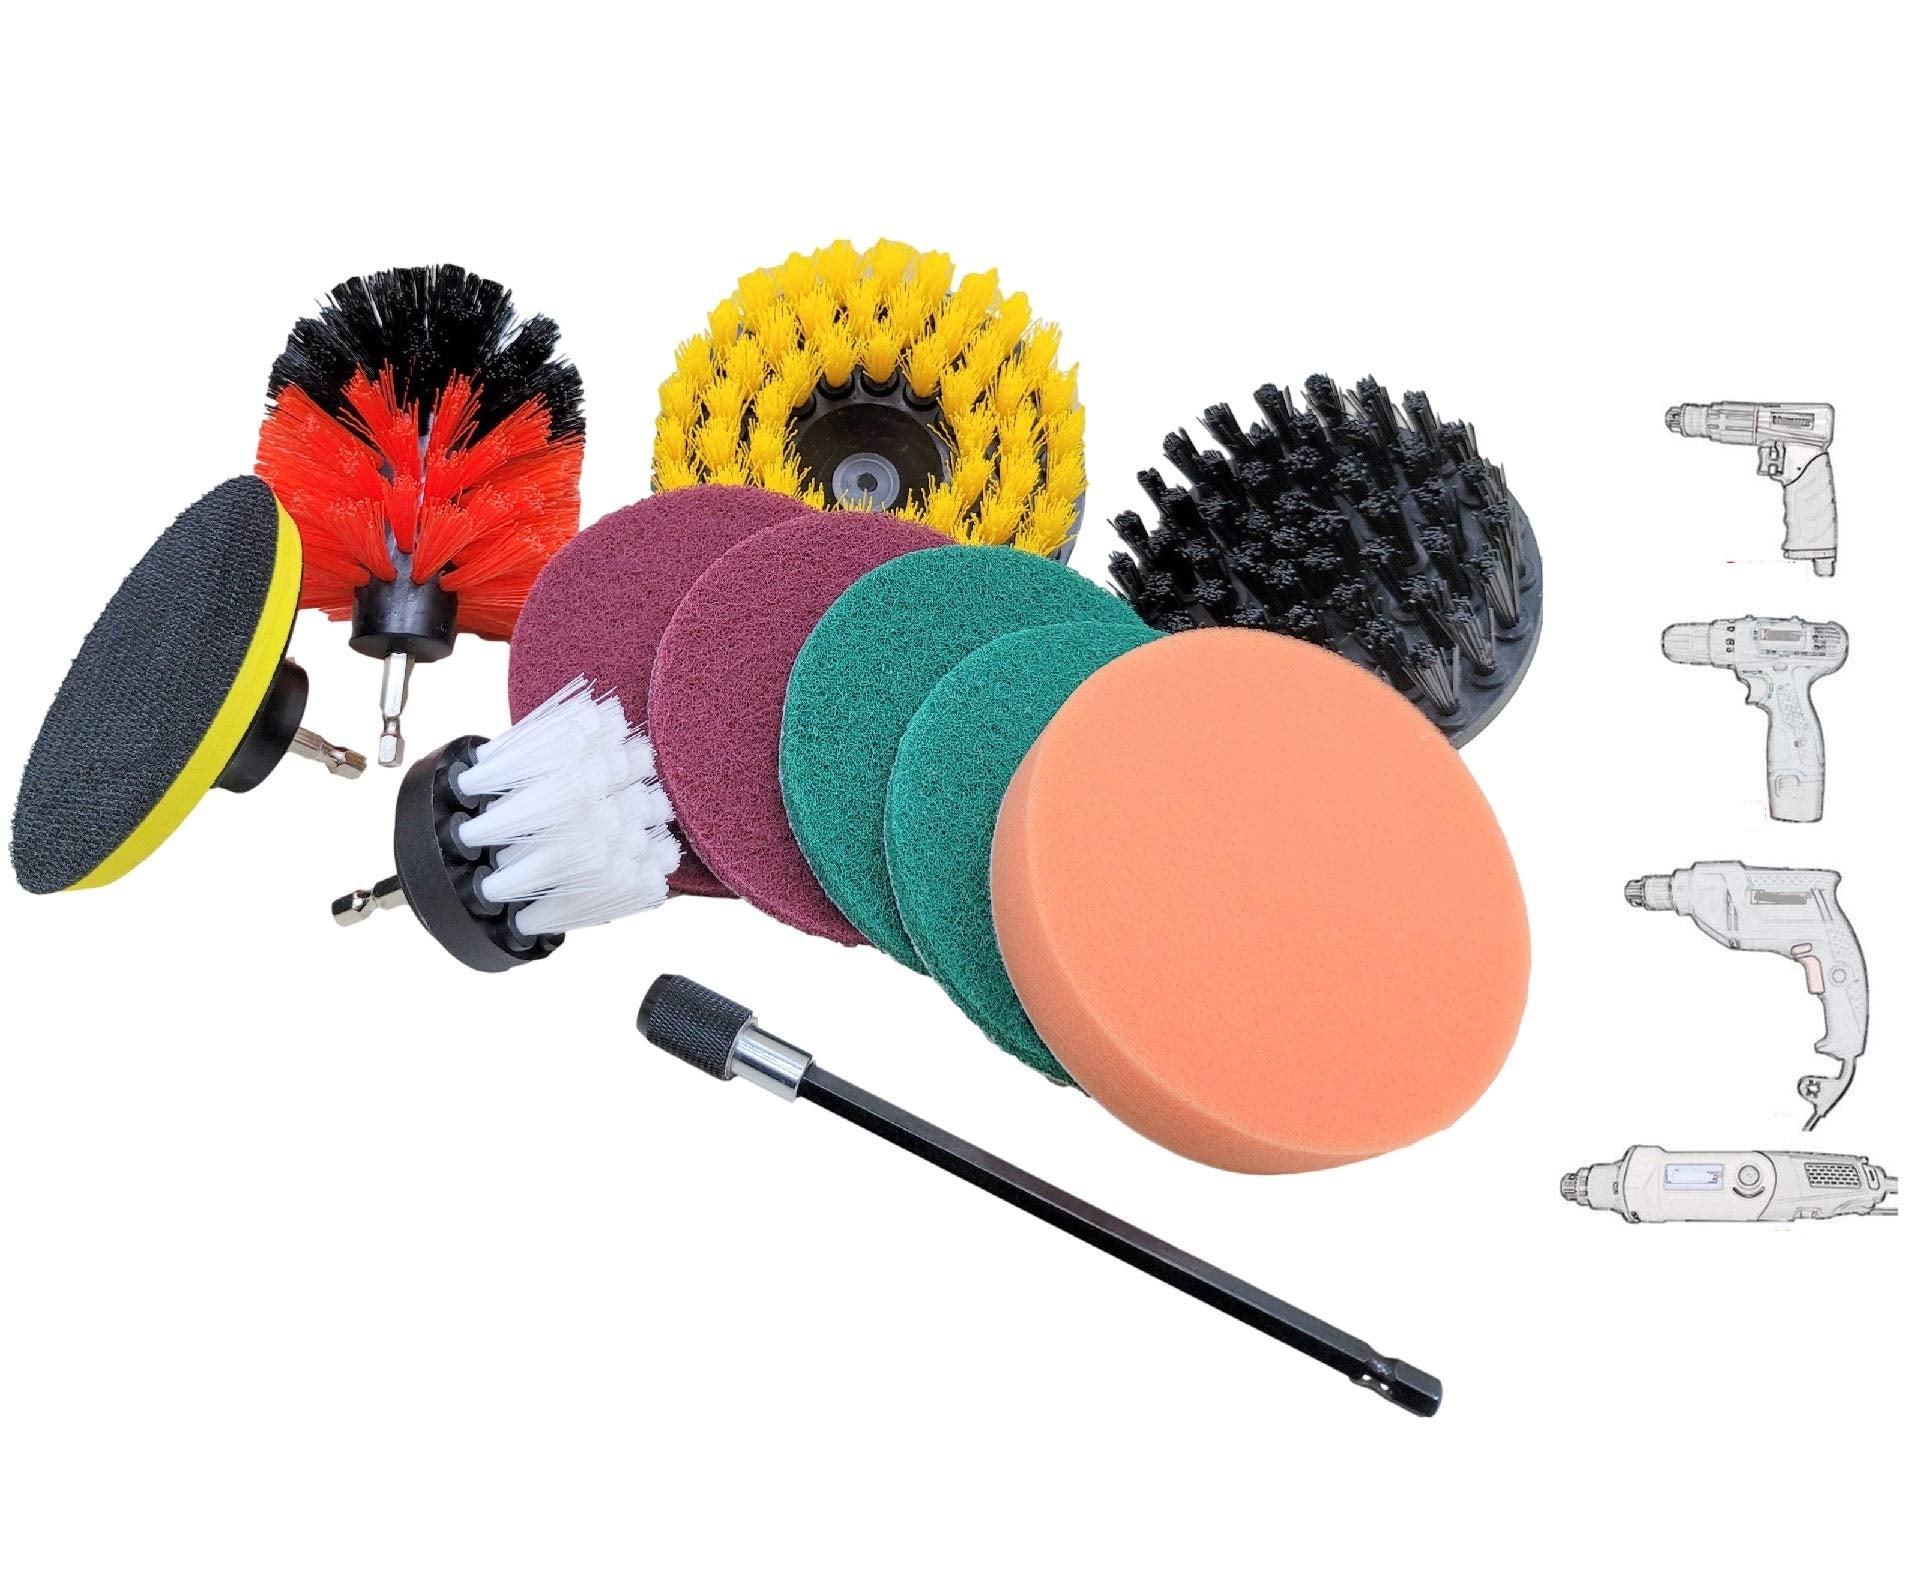 1pc Multi-function Small Brush For Stove Cleaning